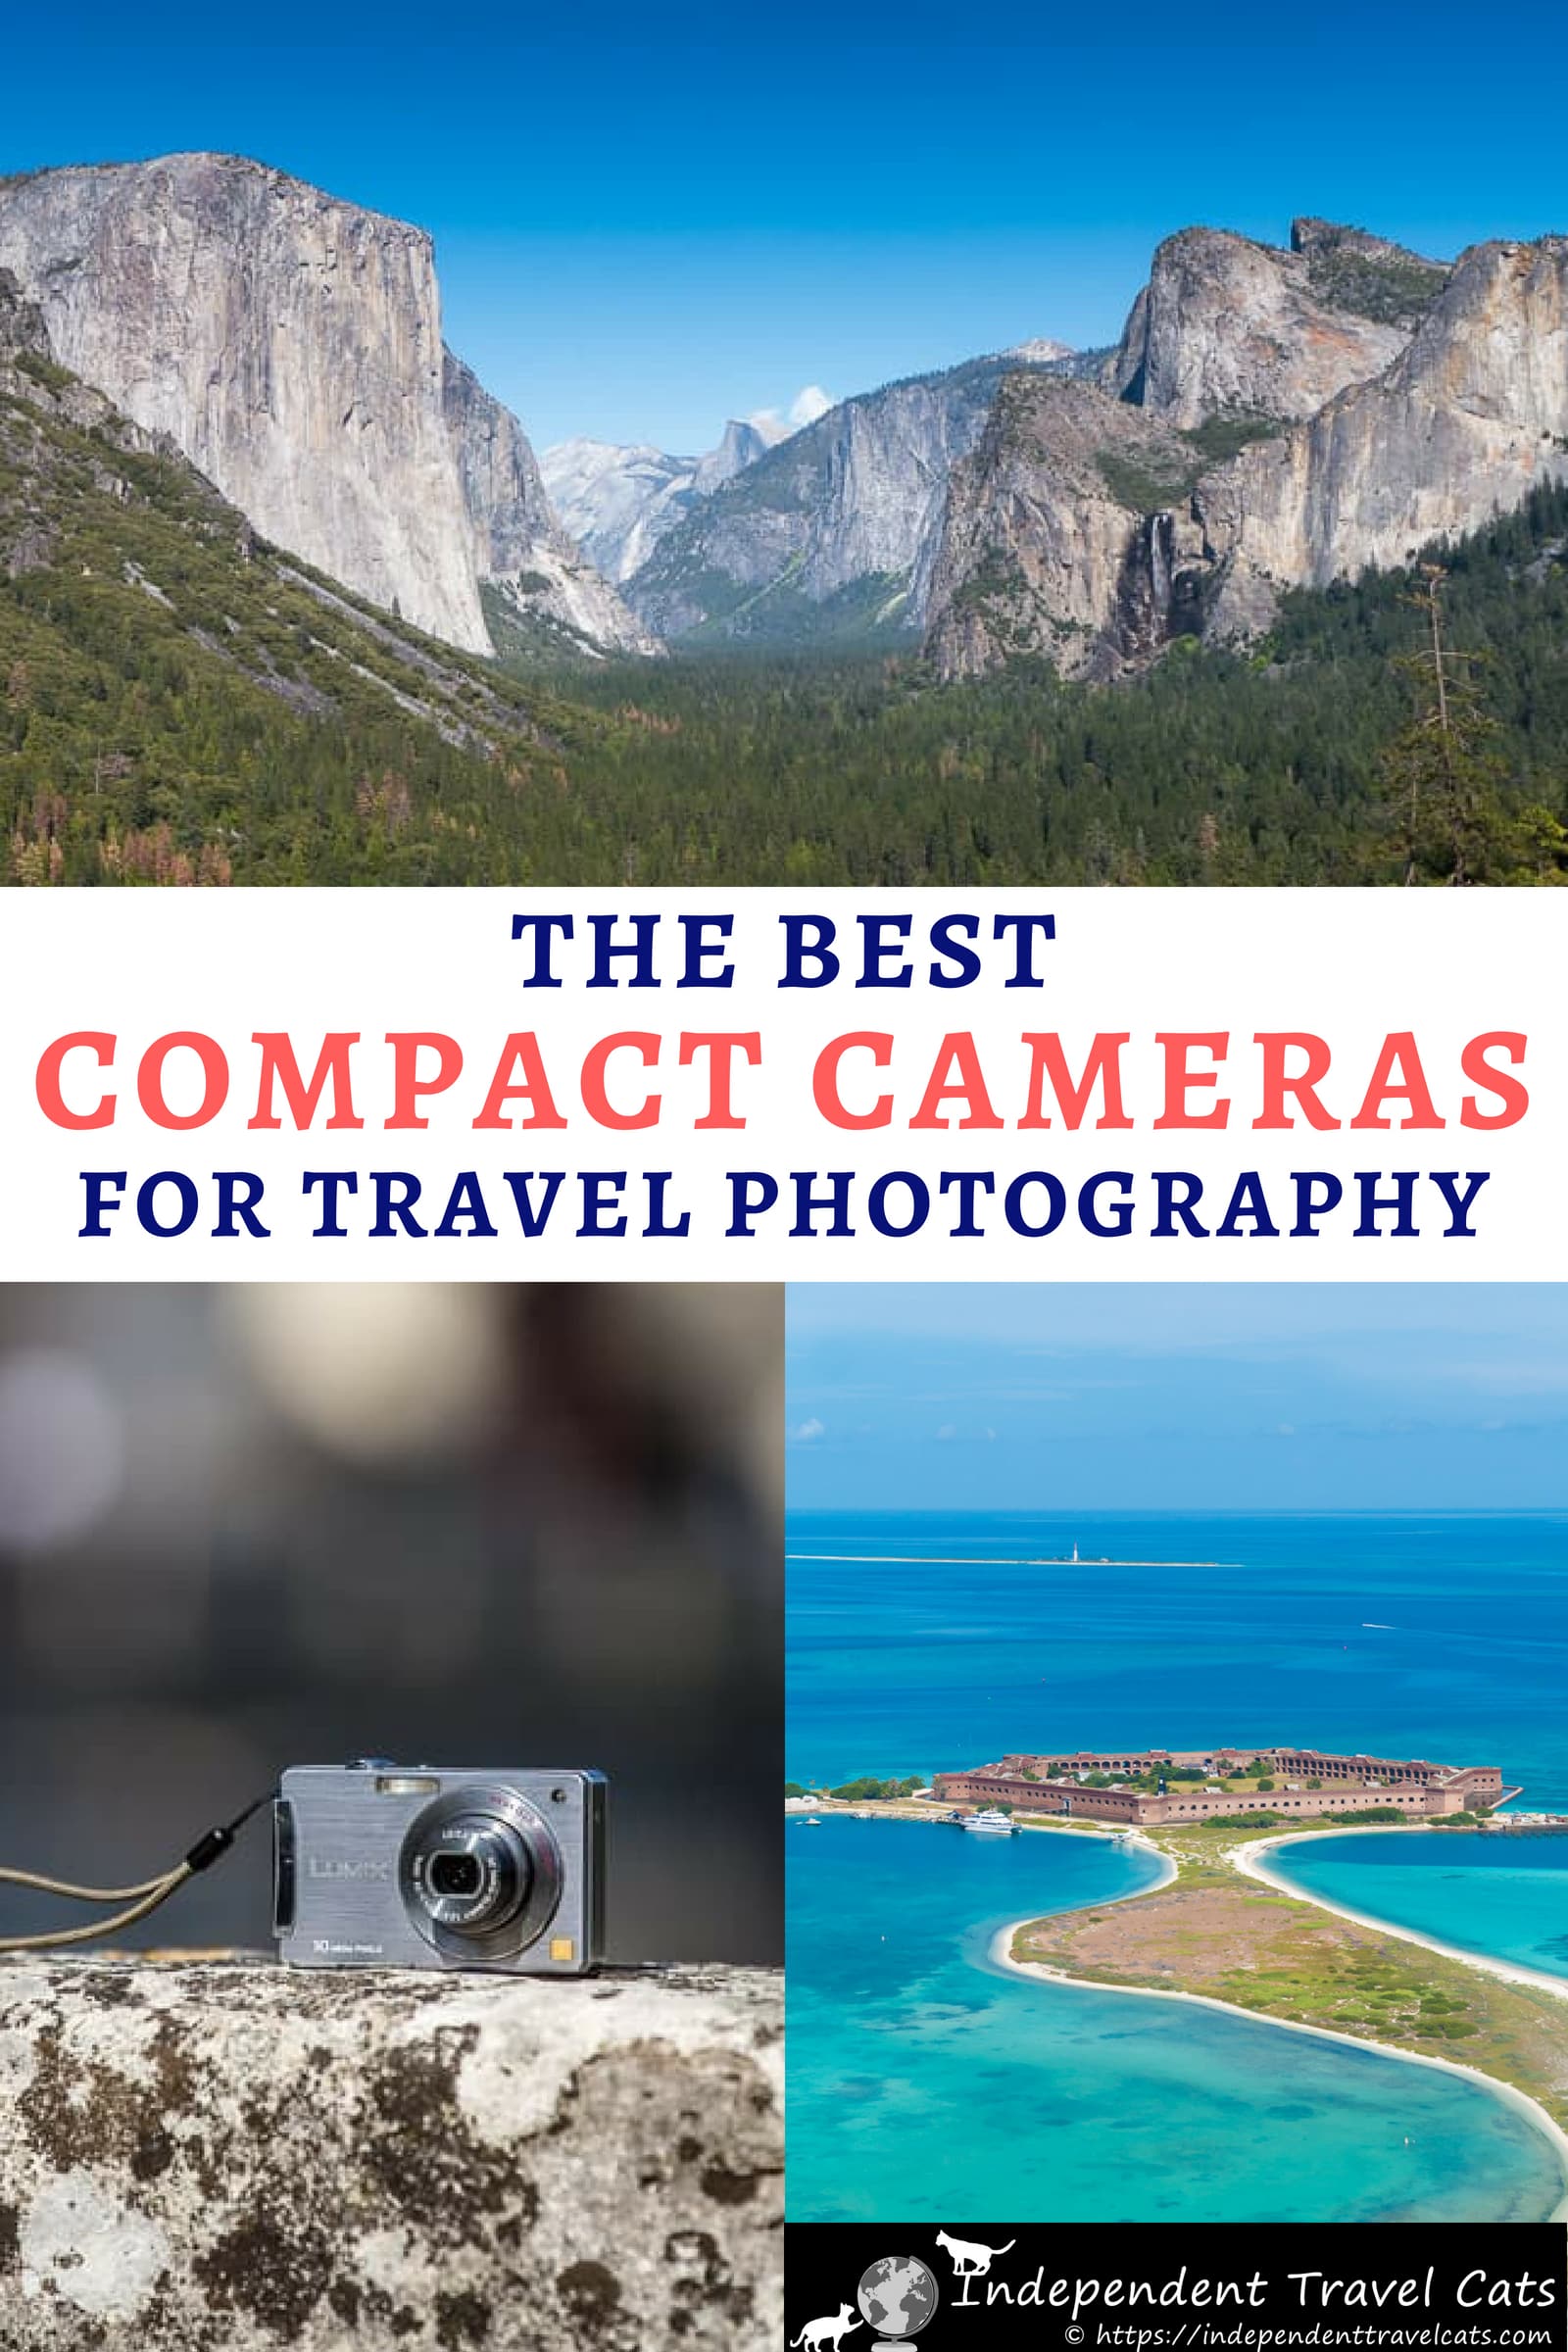 A guide to the best compact cameras for travel at every price point. We'll help you decide how to choose the best compact camera and share a list of the best compact point-and-shoot cameras currently available for any budget. We also give some tips on how to make the most of your point-and-shoot camera when you take it on your next vacation. #travelcamera #travelphotography #travel #compactcameras #pointandshootcamera #photography #budgettravel #cameras